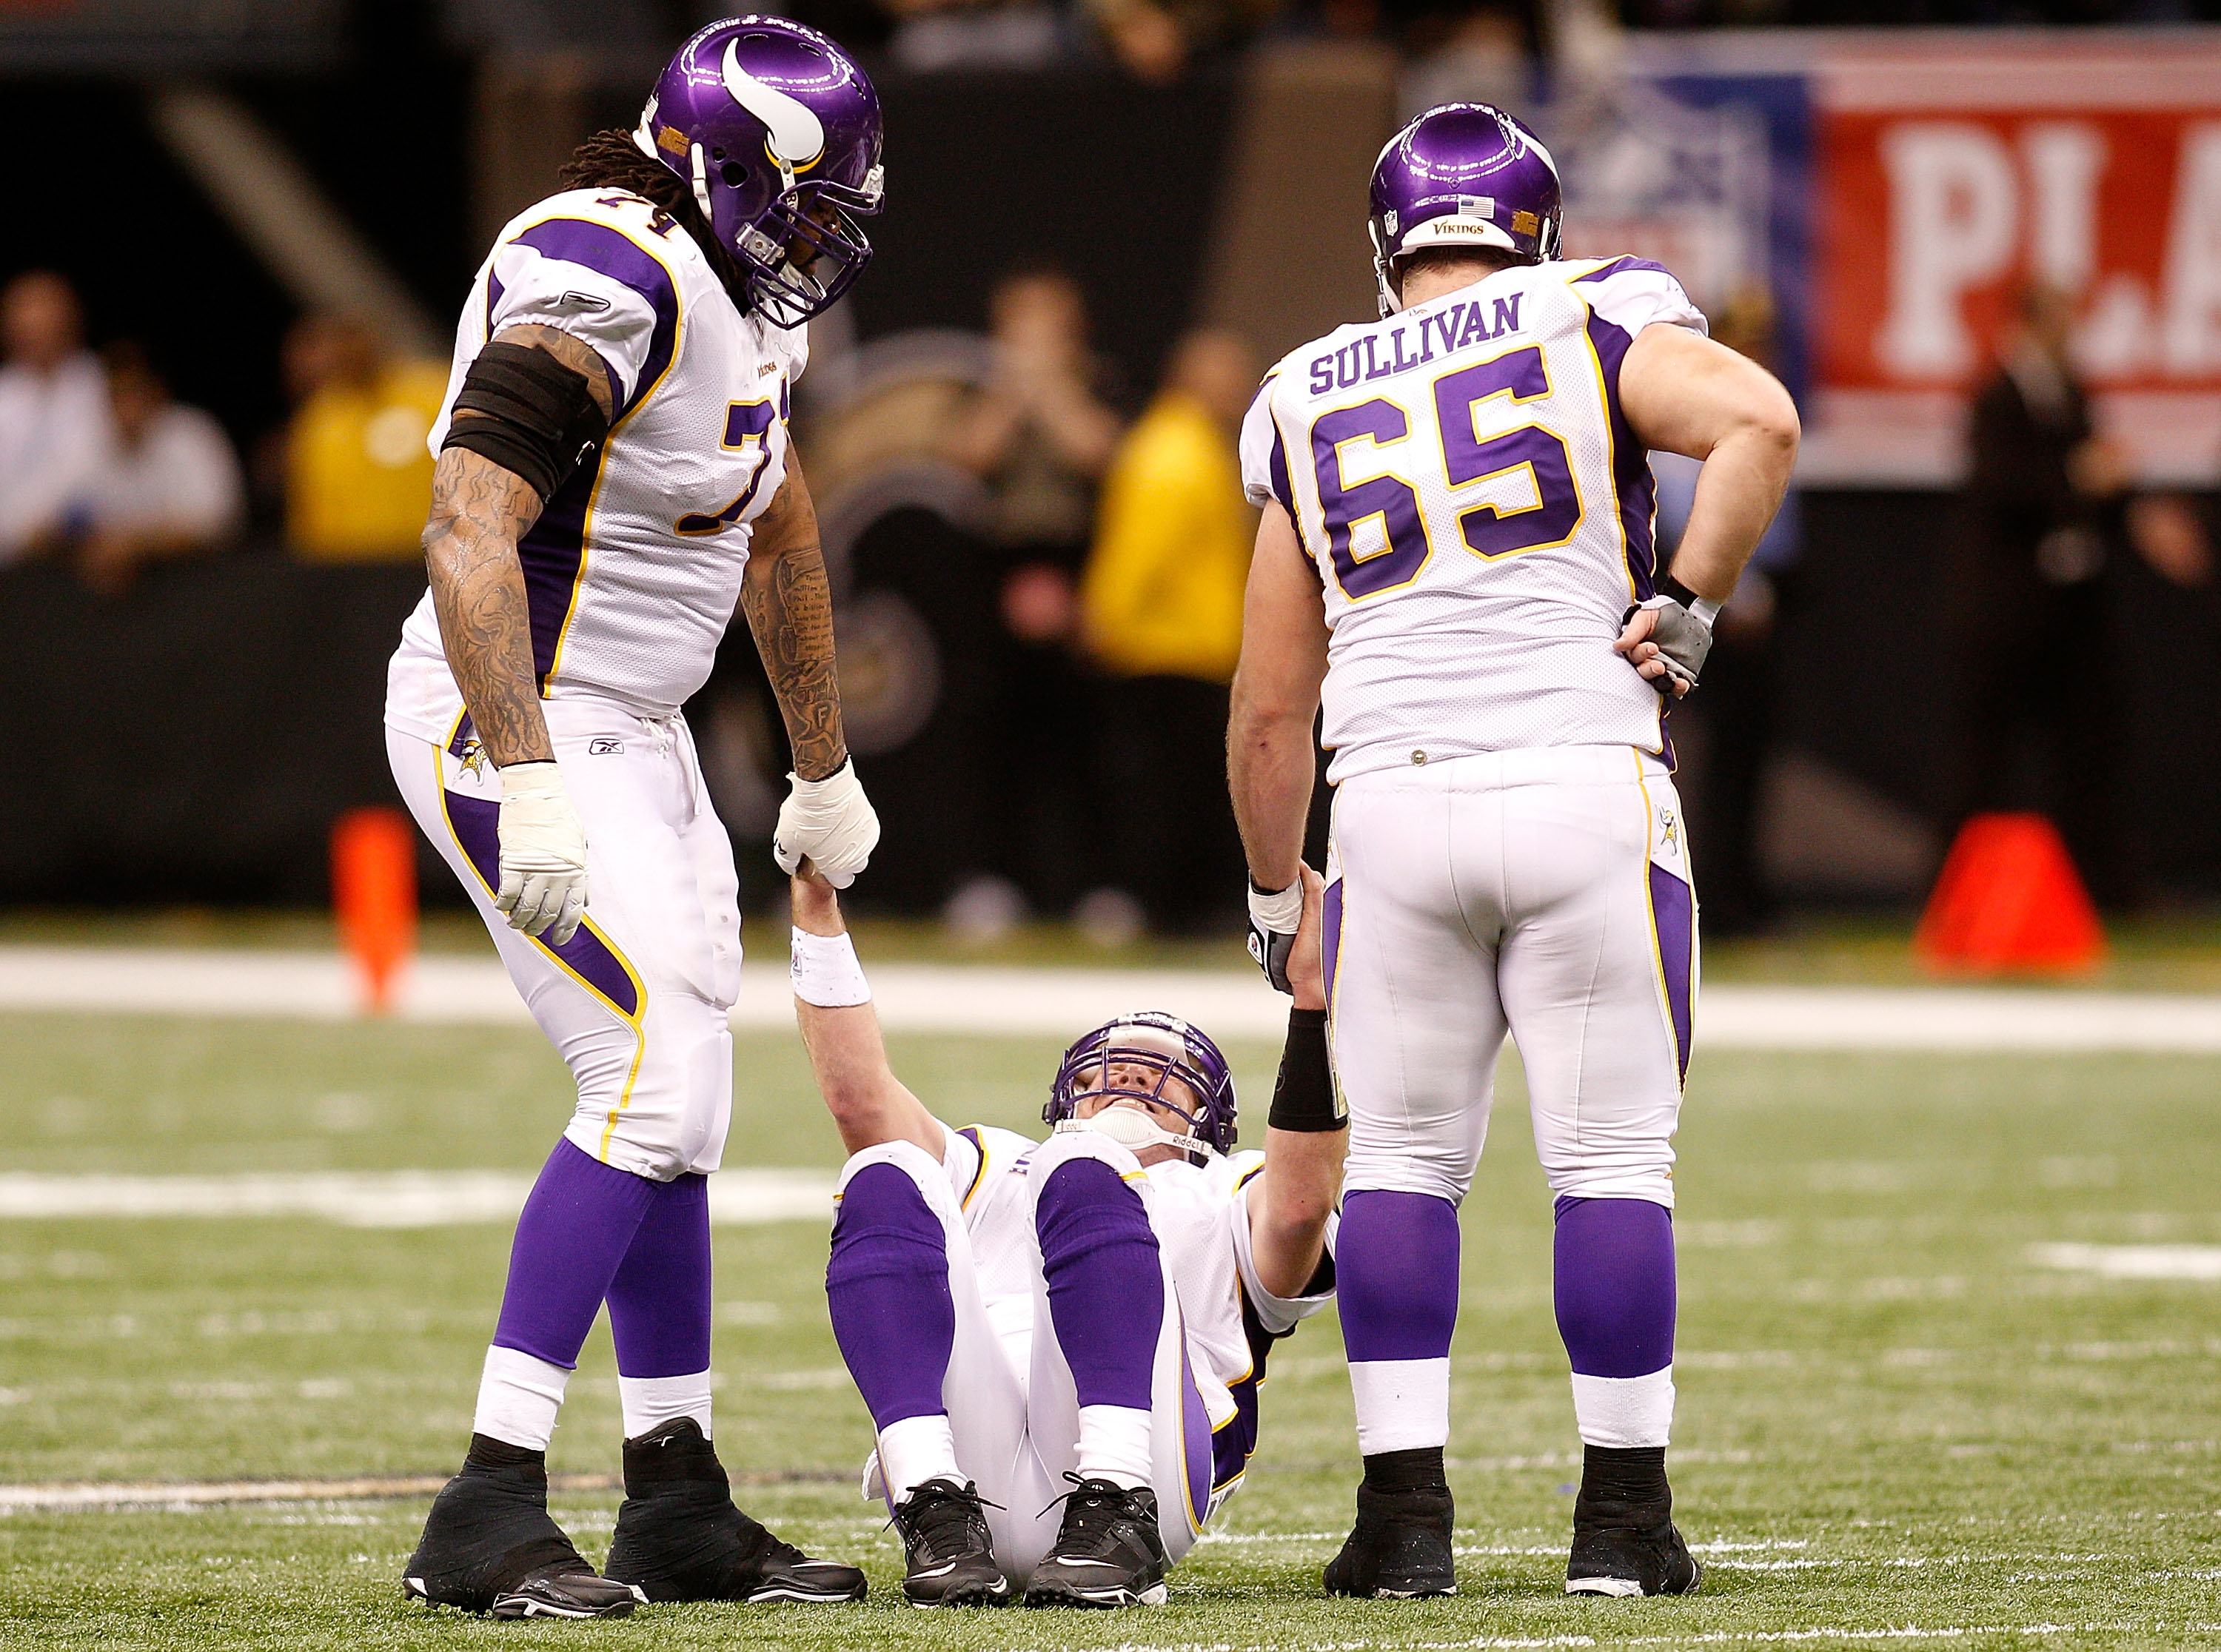 The Minnesota offensive line must do a better job protecting Brett Favre if his iron man streak is to continue.